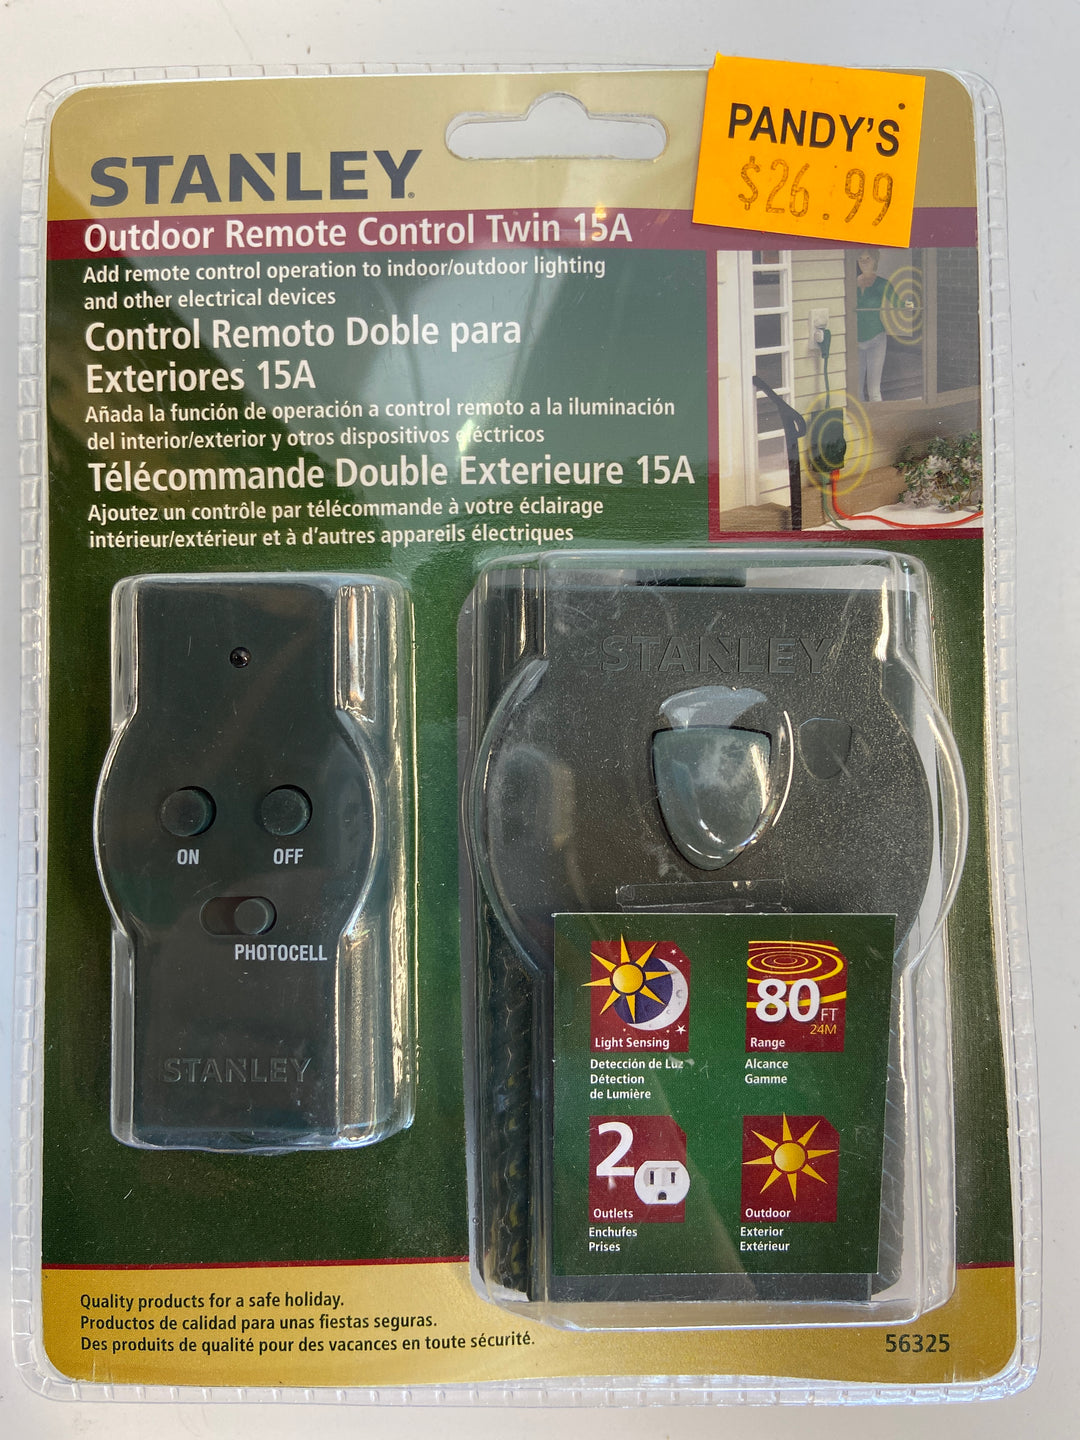 Outdoor Remote Control Twin 15A